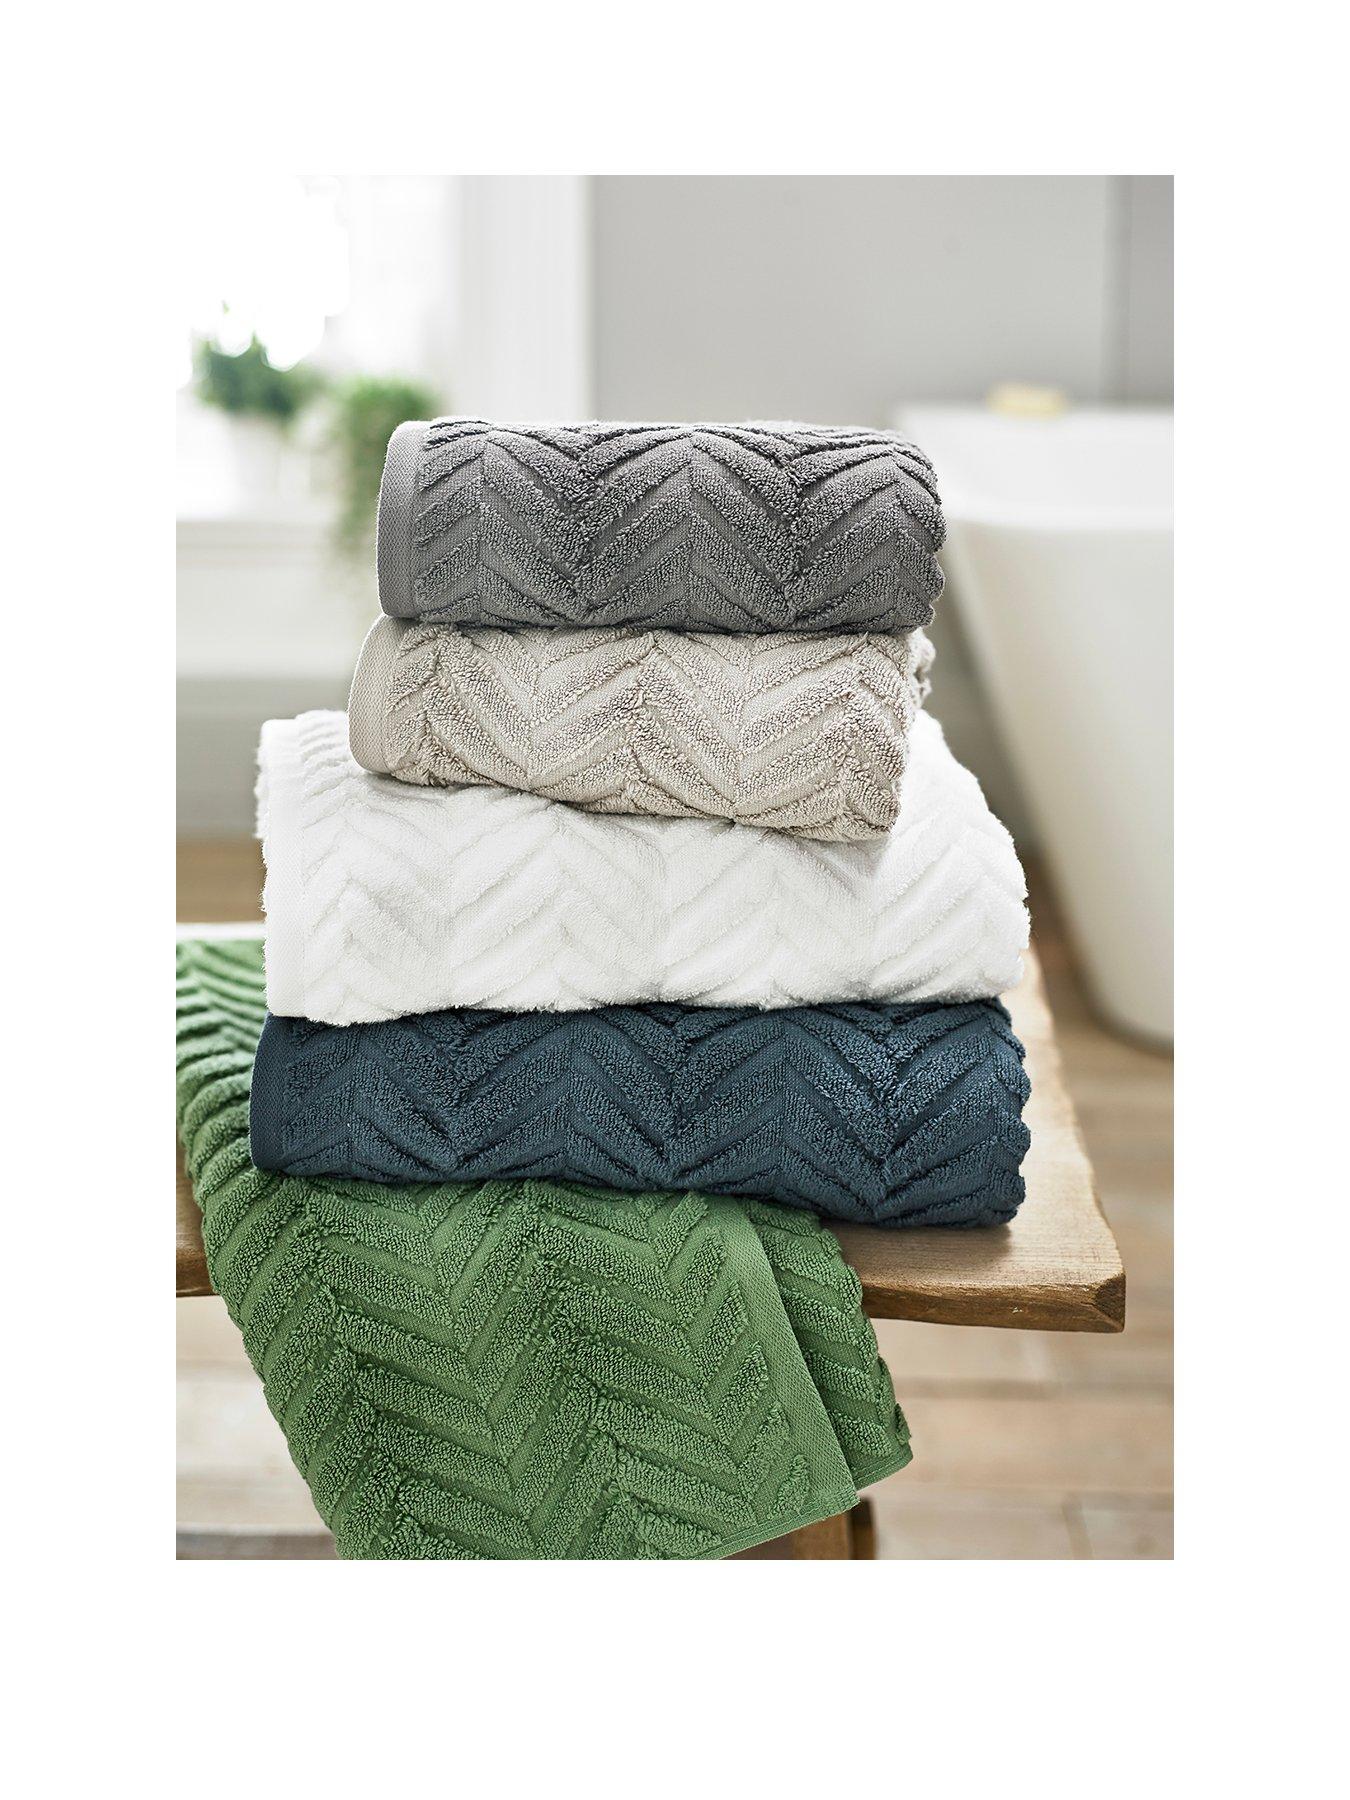 Bliss Luxury Combed Cotton Bath Towel - 34 x 56 Extra Large Premium Quality Bath Sheet - 650 GSM - Soft, Absorbent (Denim, 4 Pack)